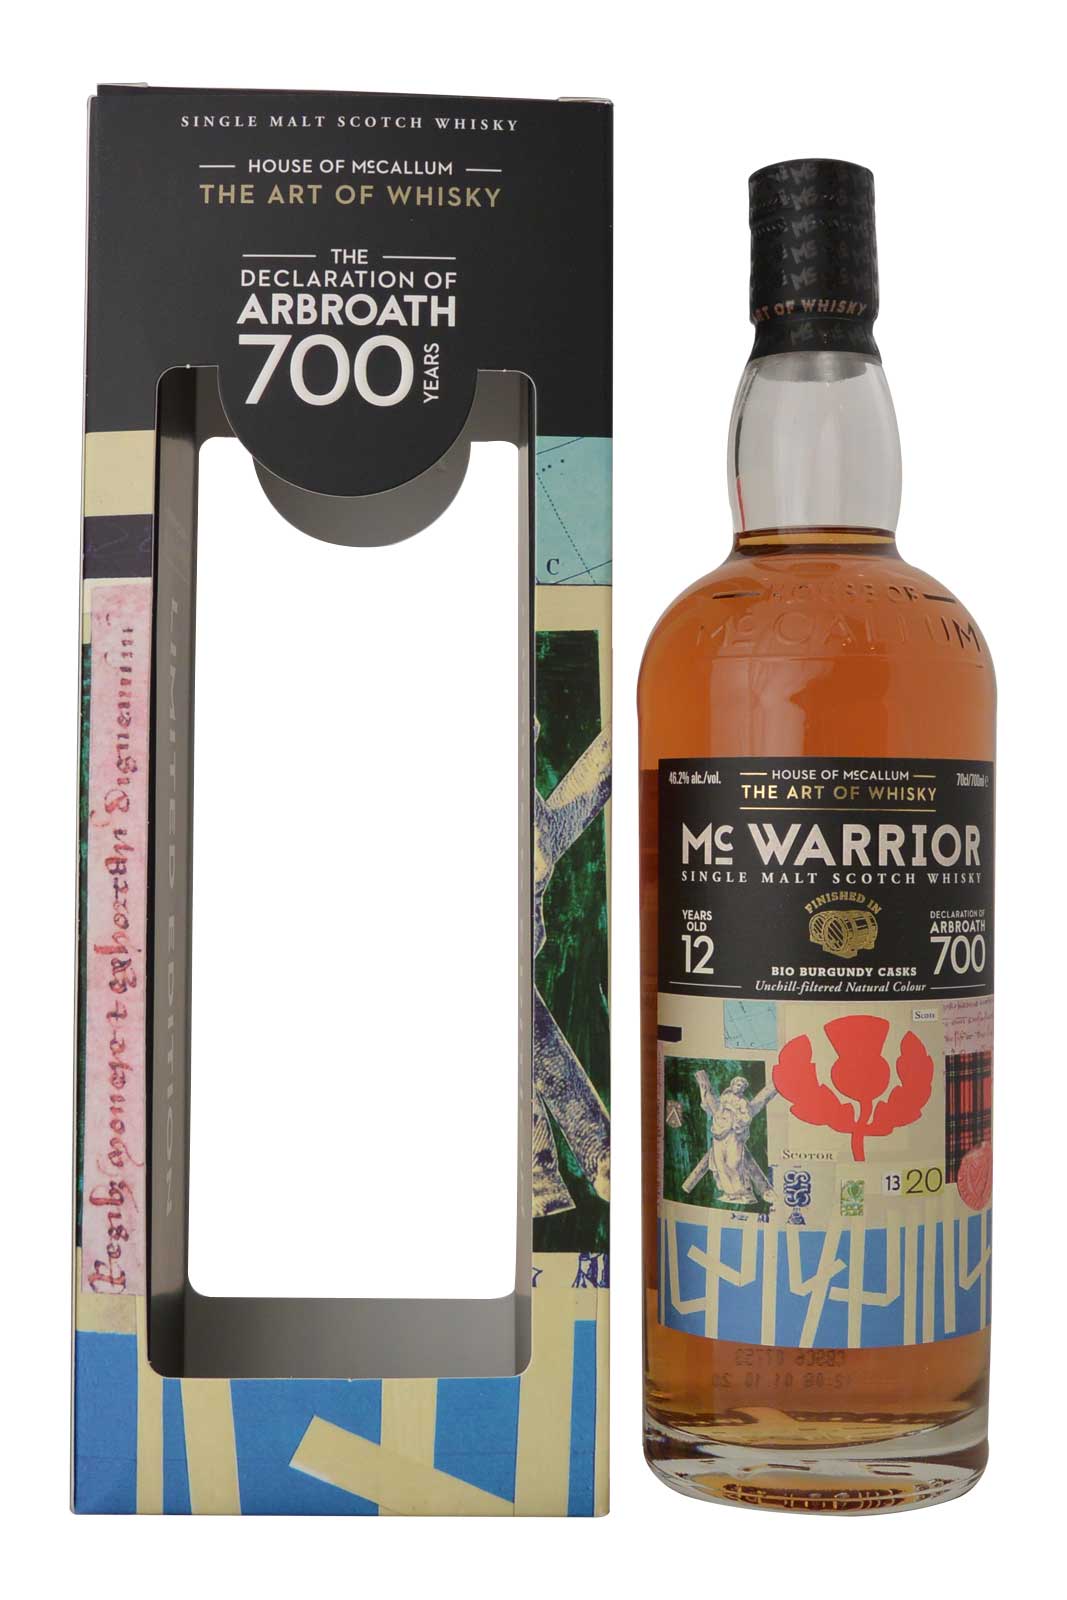 The Art of Whisky McWarrior Glenburgie 12 Year Old House of McCallum